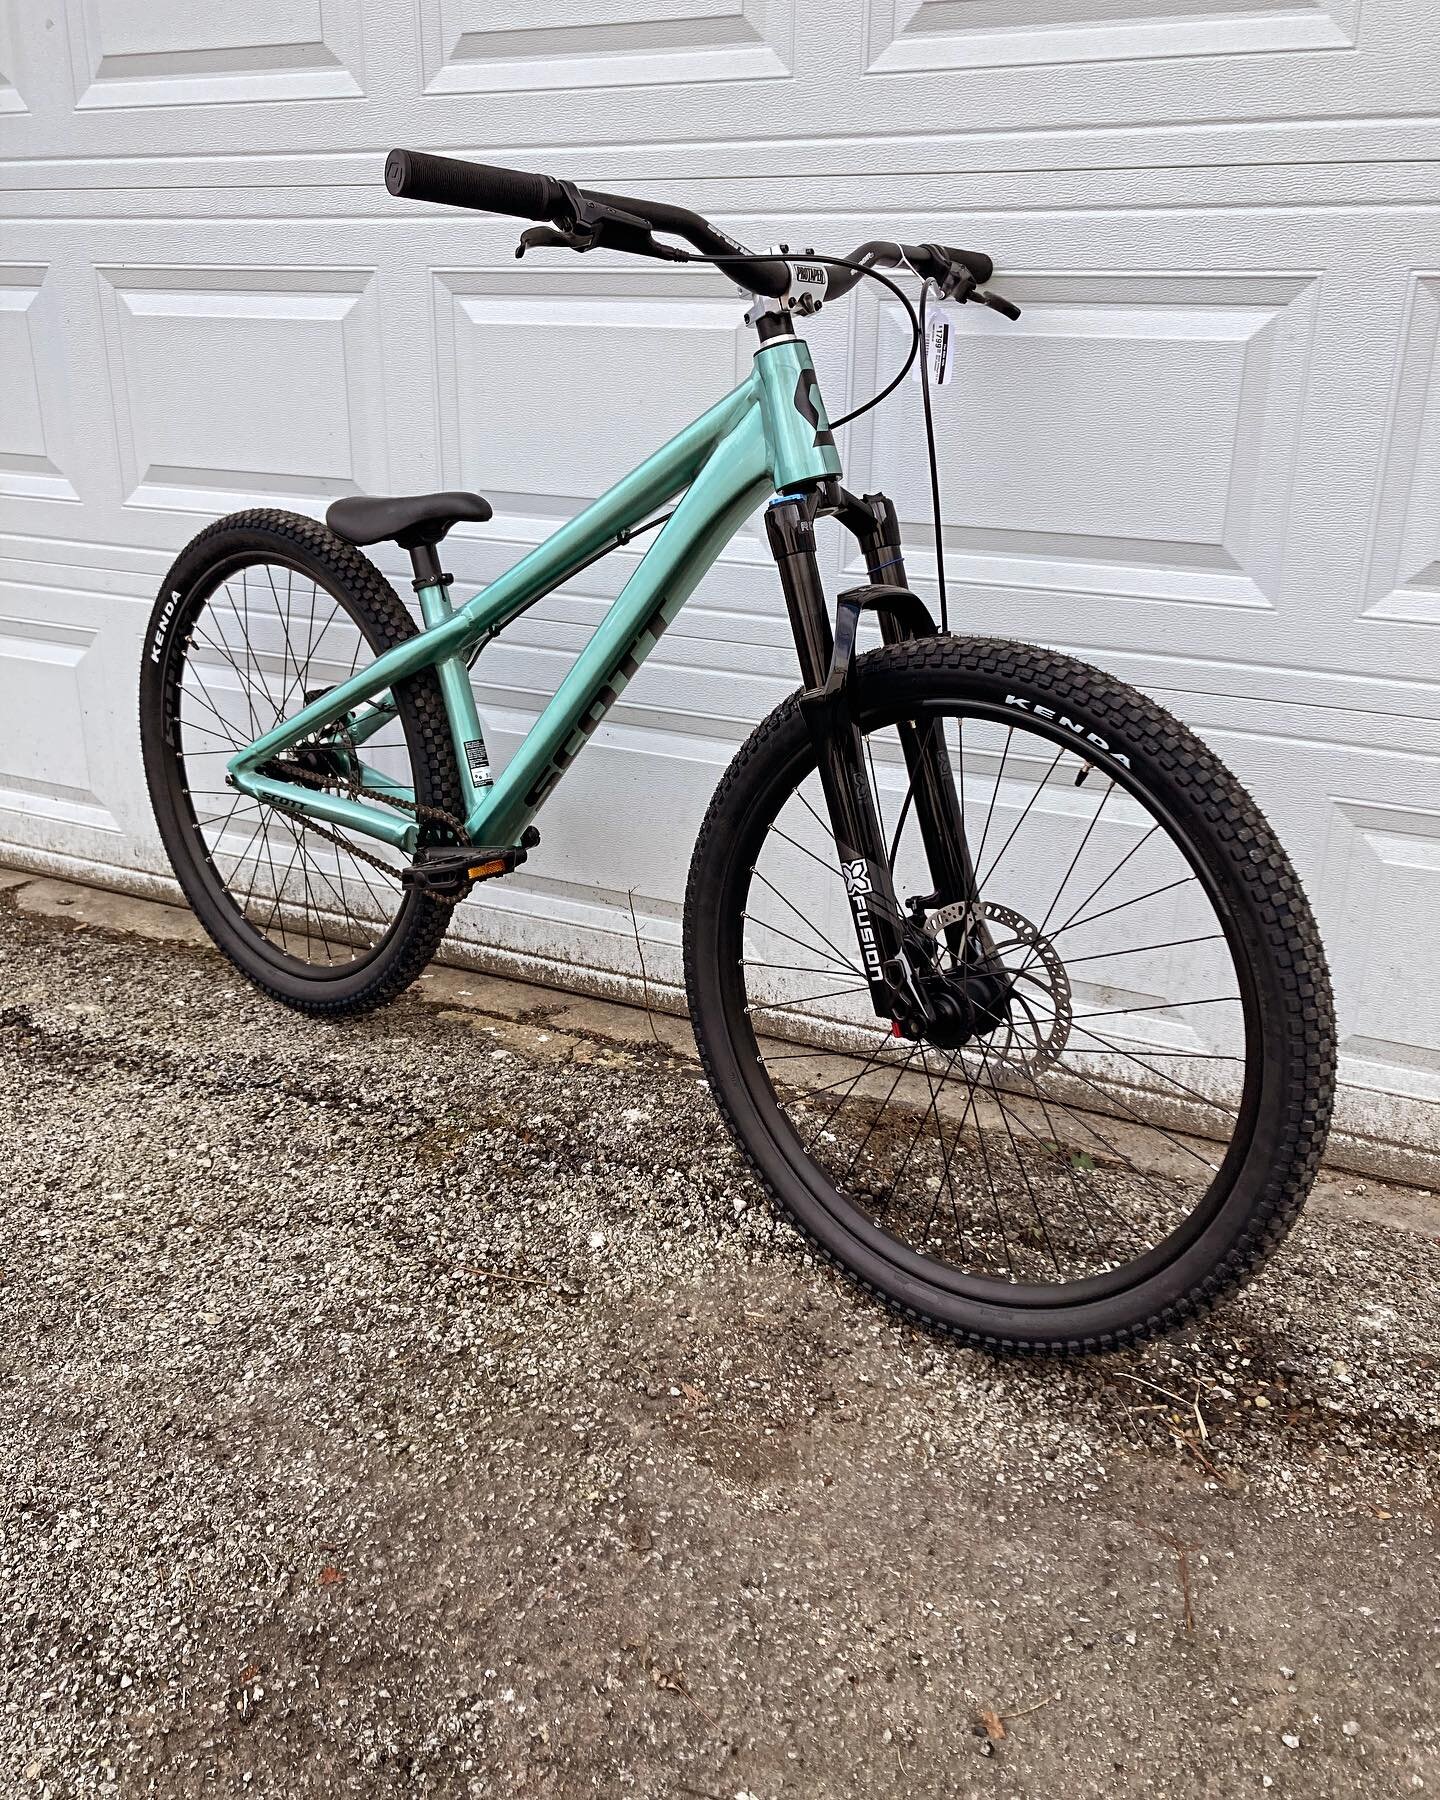 We have this gorgeous Dirt Jumper on sale!! @bikeonscott On closeout so you better snag it before Spring rolls in early! Perfect bike for @bigmarshchicago - #mtb #dirtbike #dirtjumper #onsale #closeout #bikesale #pumptrack #slopestyle #checkitout #th